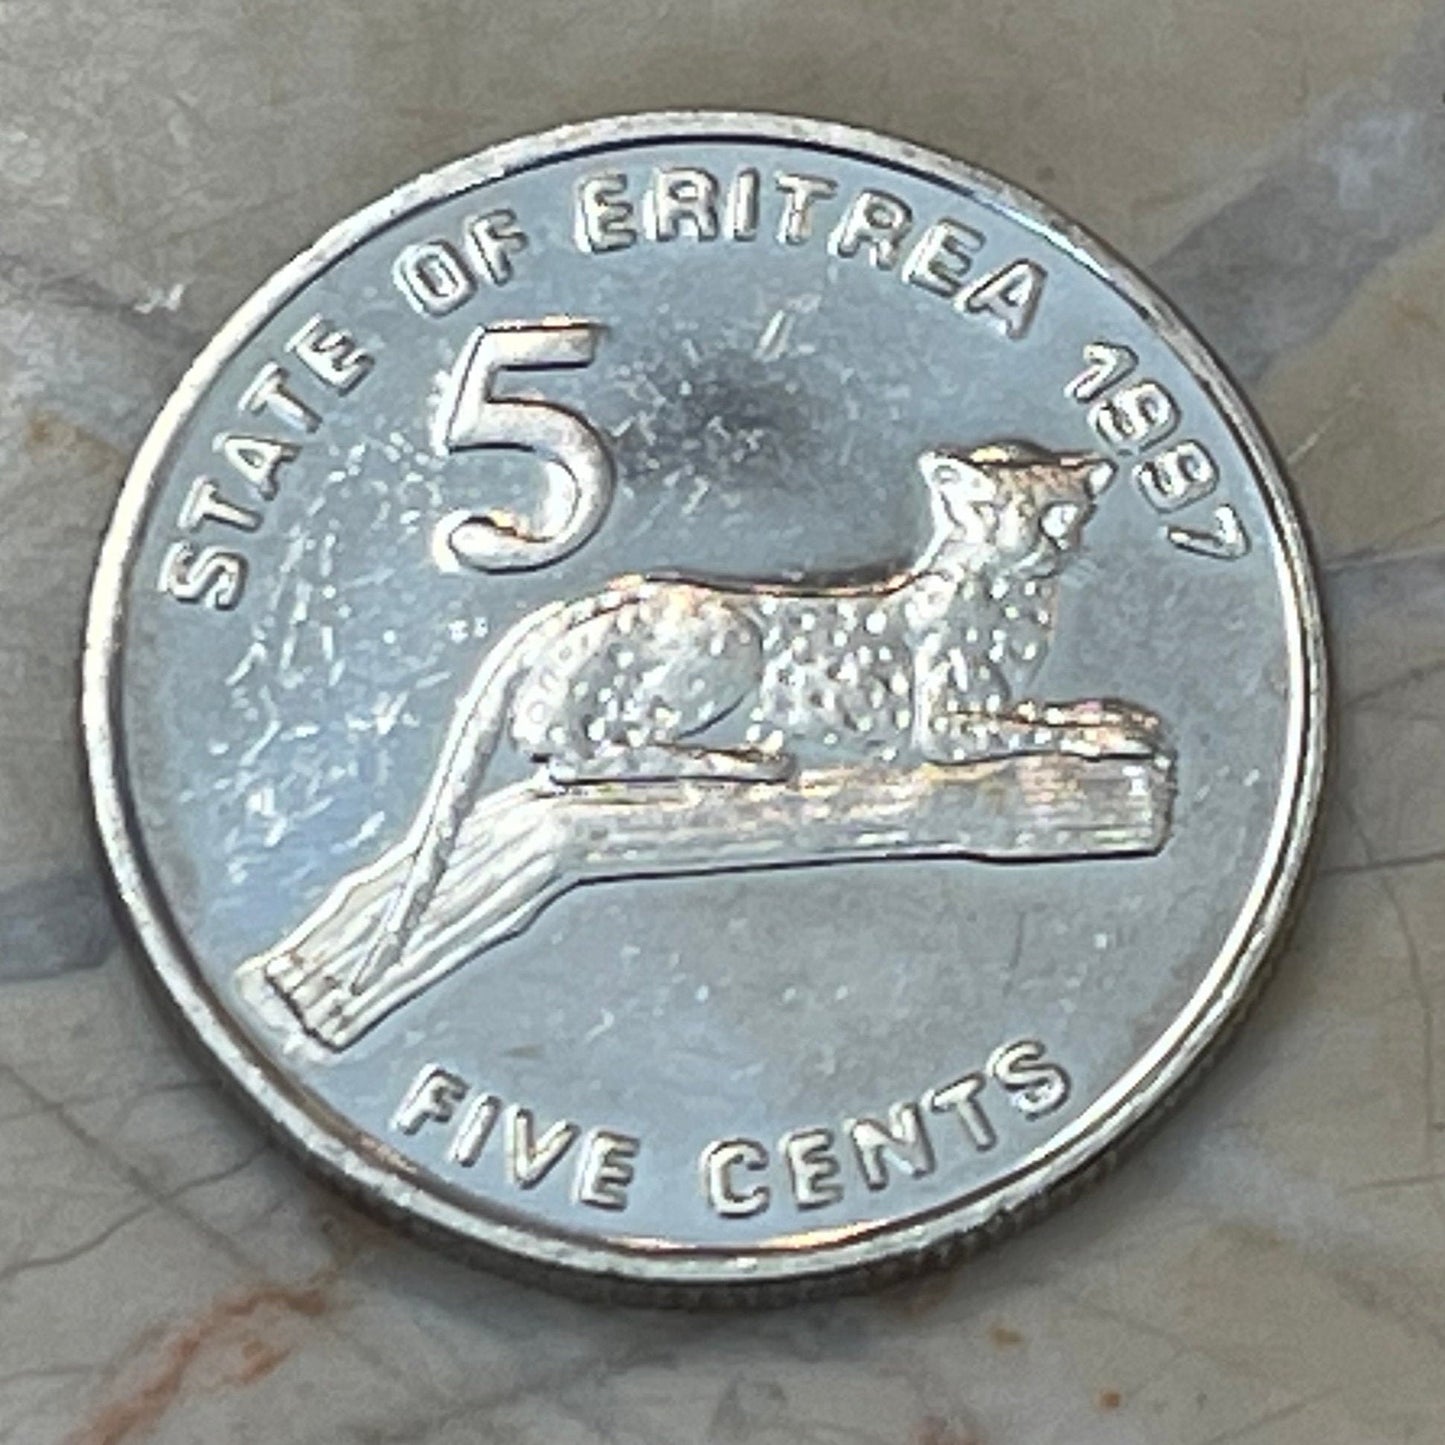 Leopard & Liberty Equality Justice Eritrea 5 Cents Authentic Coin Money for Jewelry and Craft Making